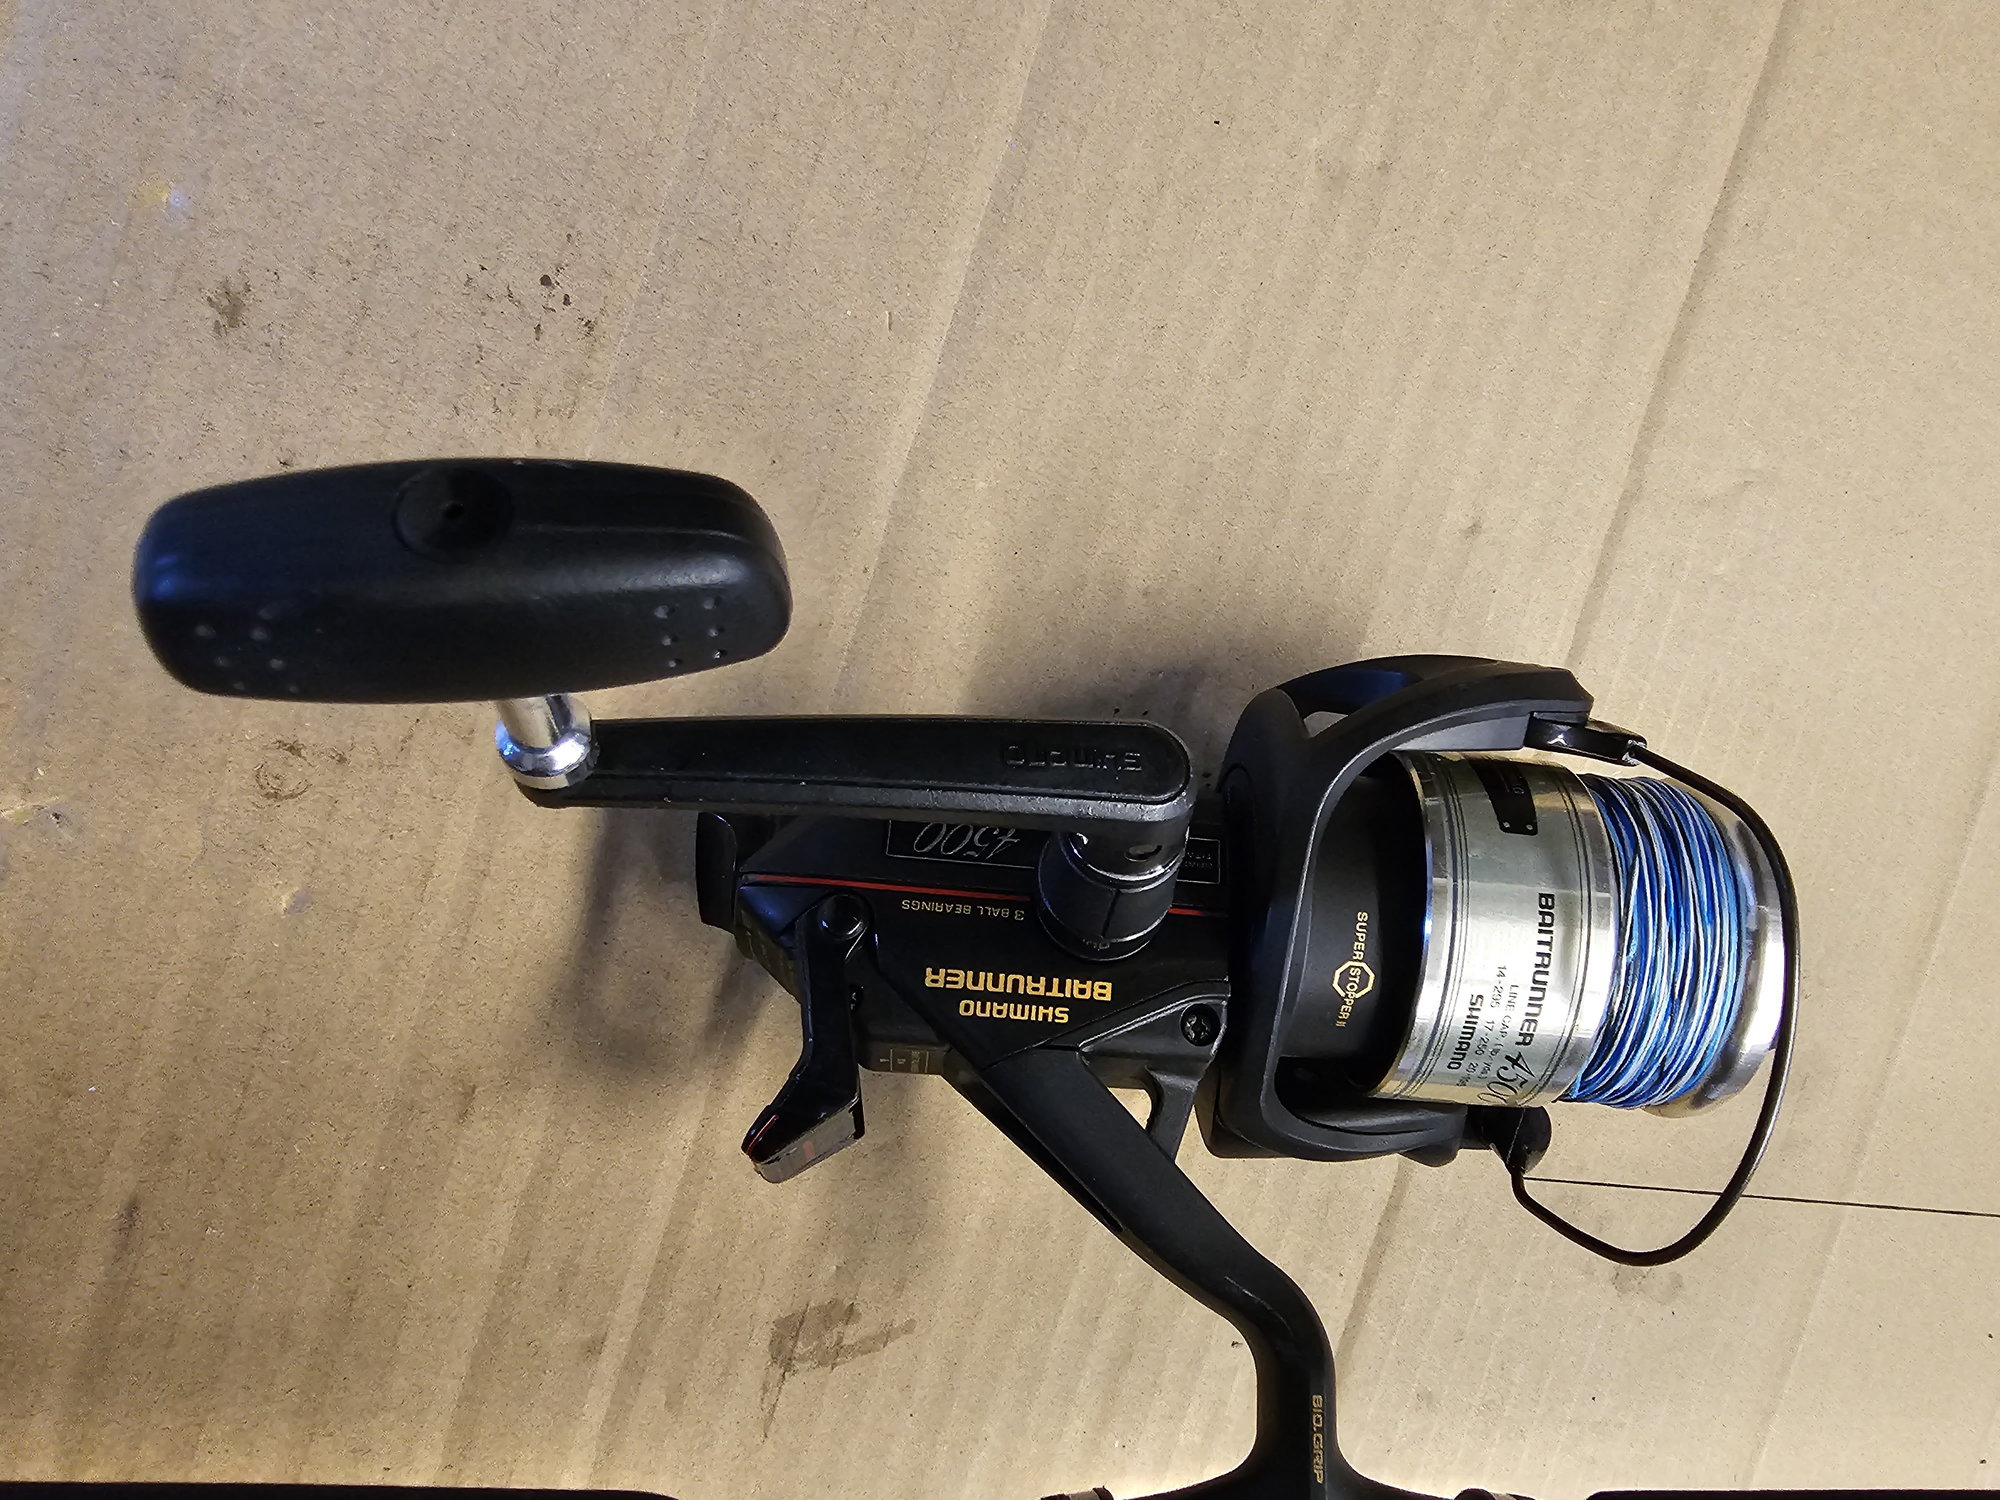 Shimano Baitrunner 3500B - SOLD - The Fishing Website : Discussion Forums